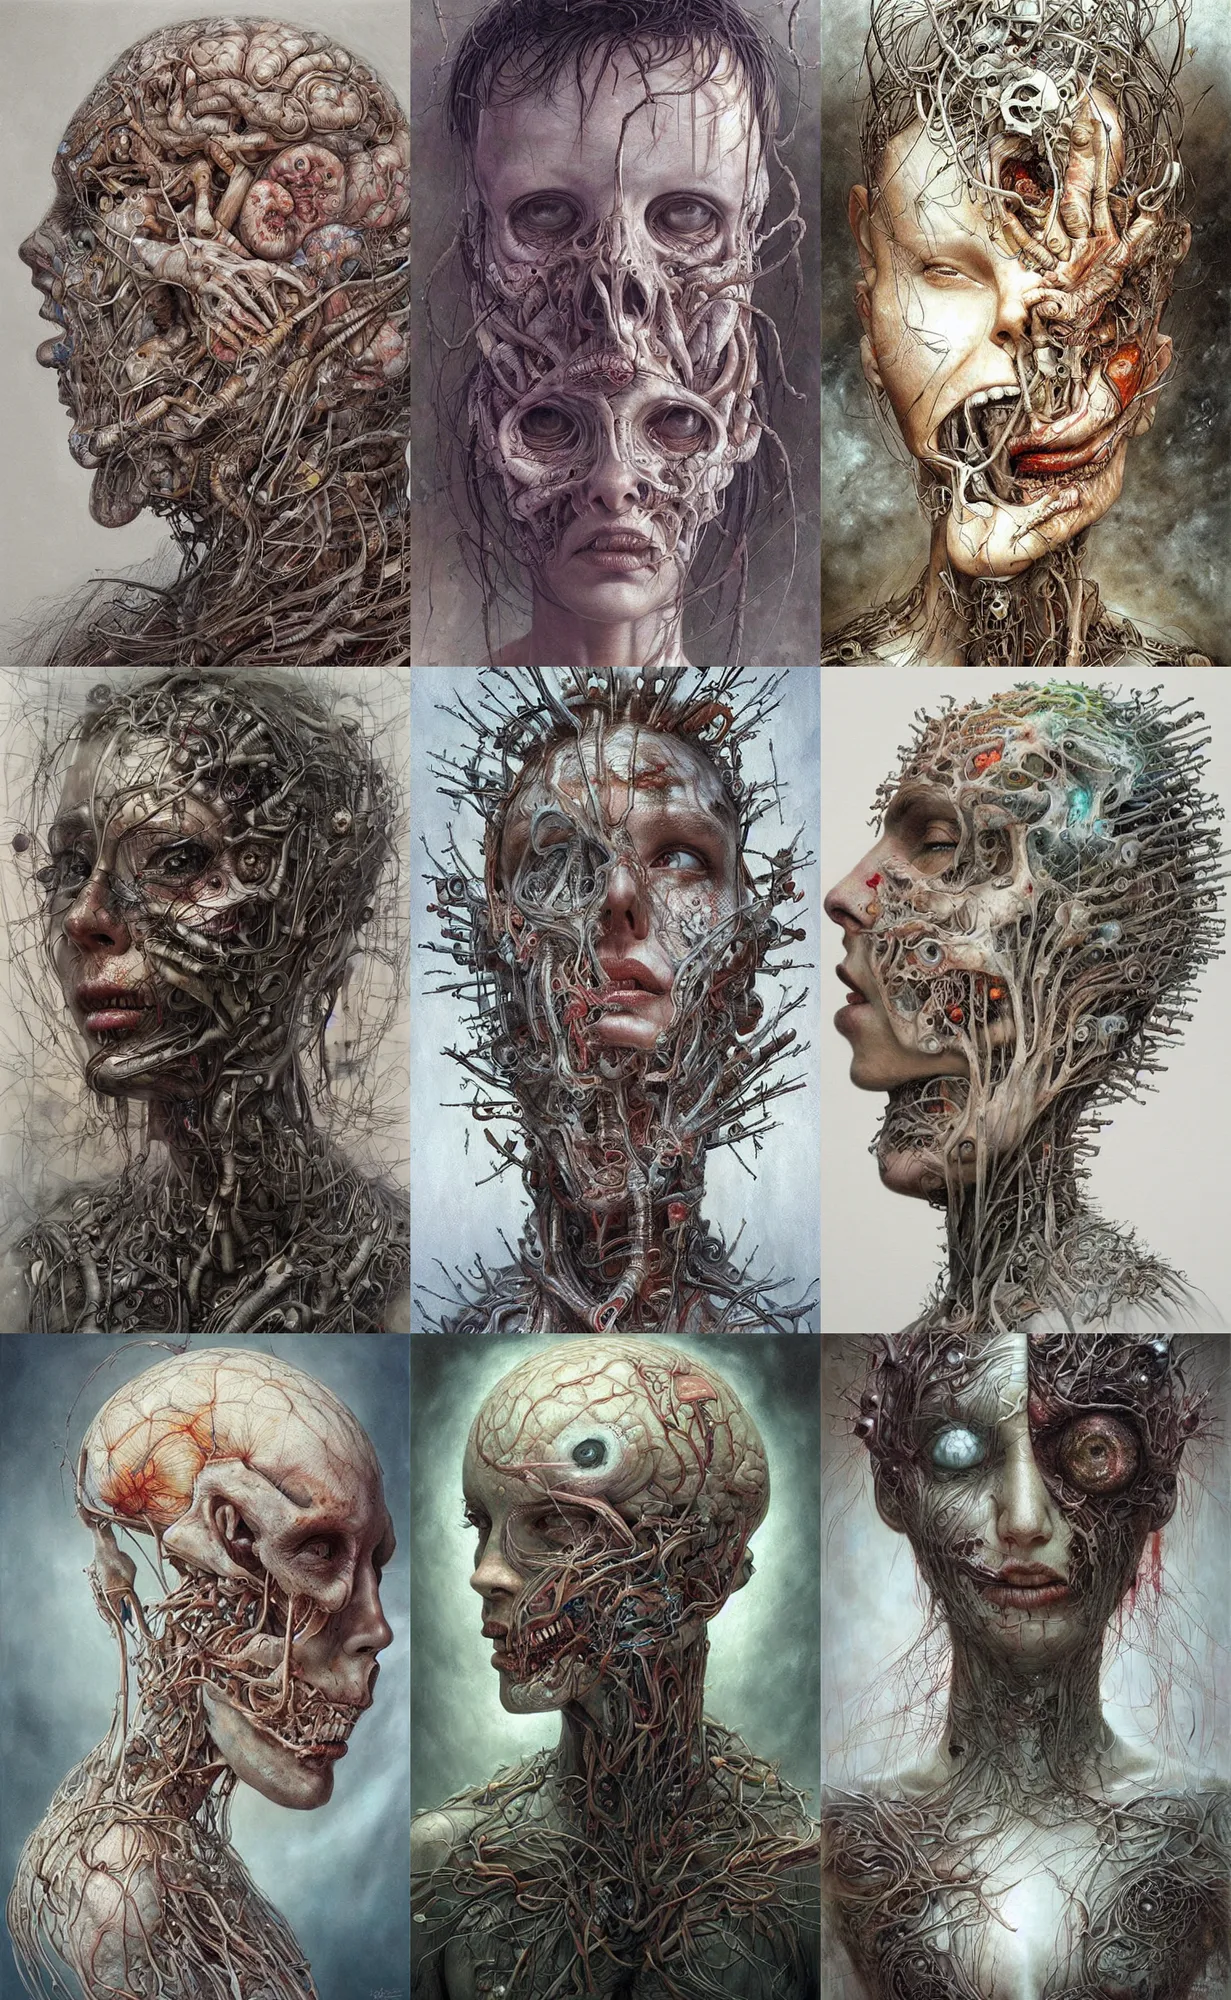 Prompt: Painting, Creative Design, Human brain, Biopunk, Body horror, by Marco Mazzoni, Peter Gric